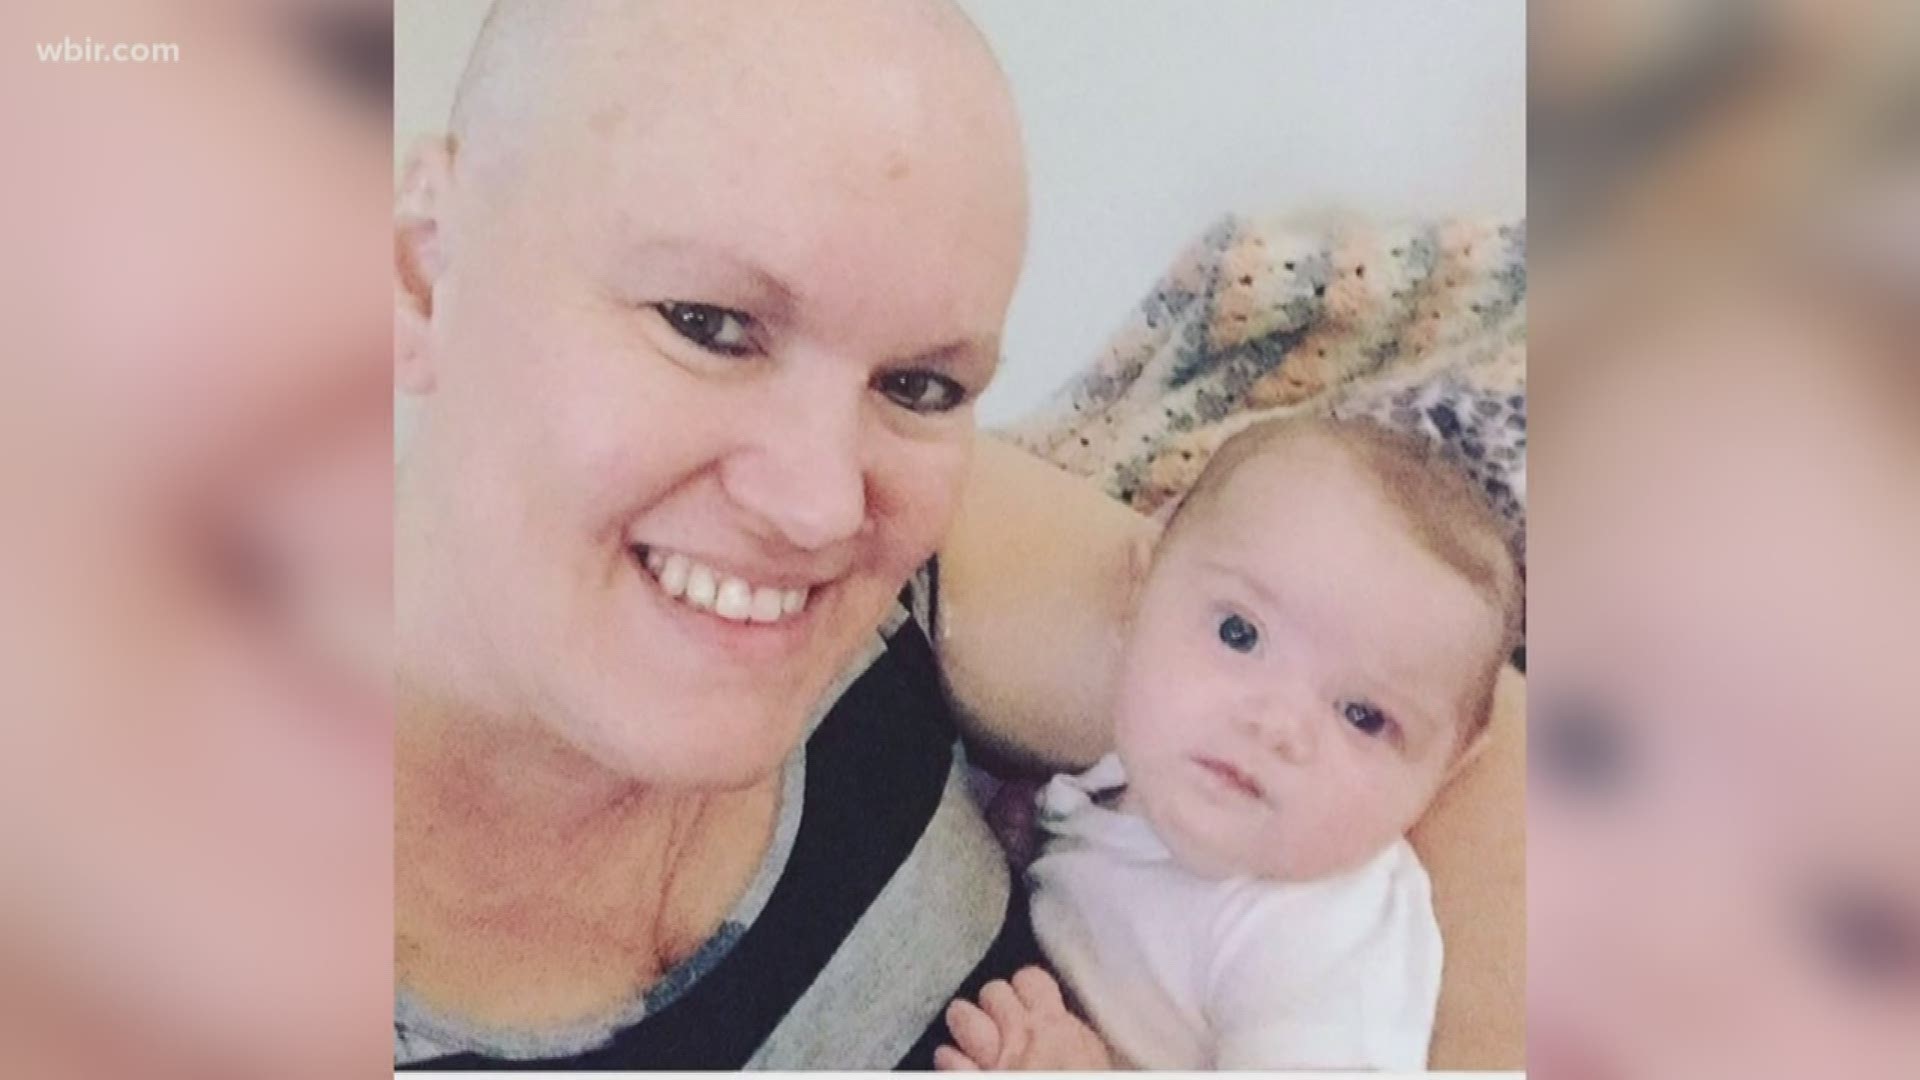 An East Tennessee breast cancer survivor is spreading the message 'don't take life for granted.'